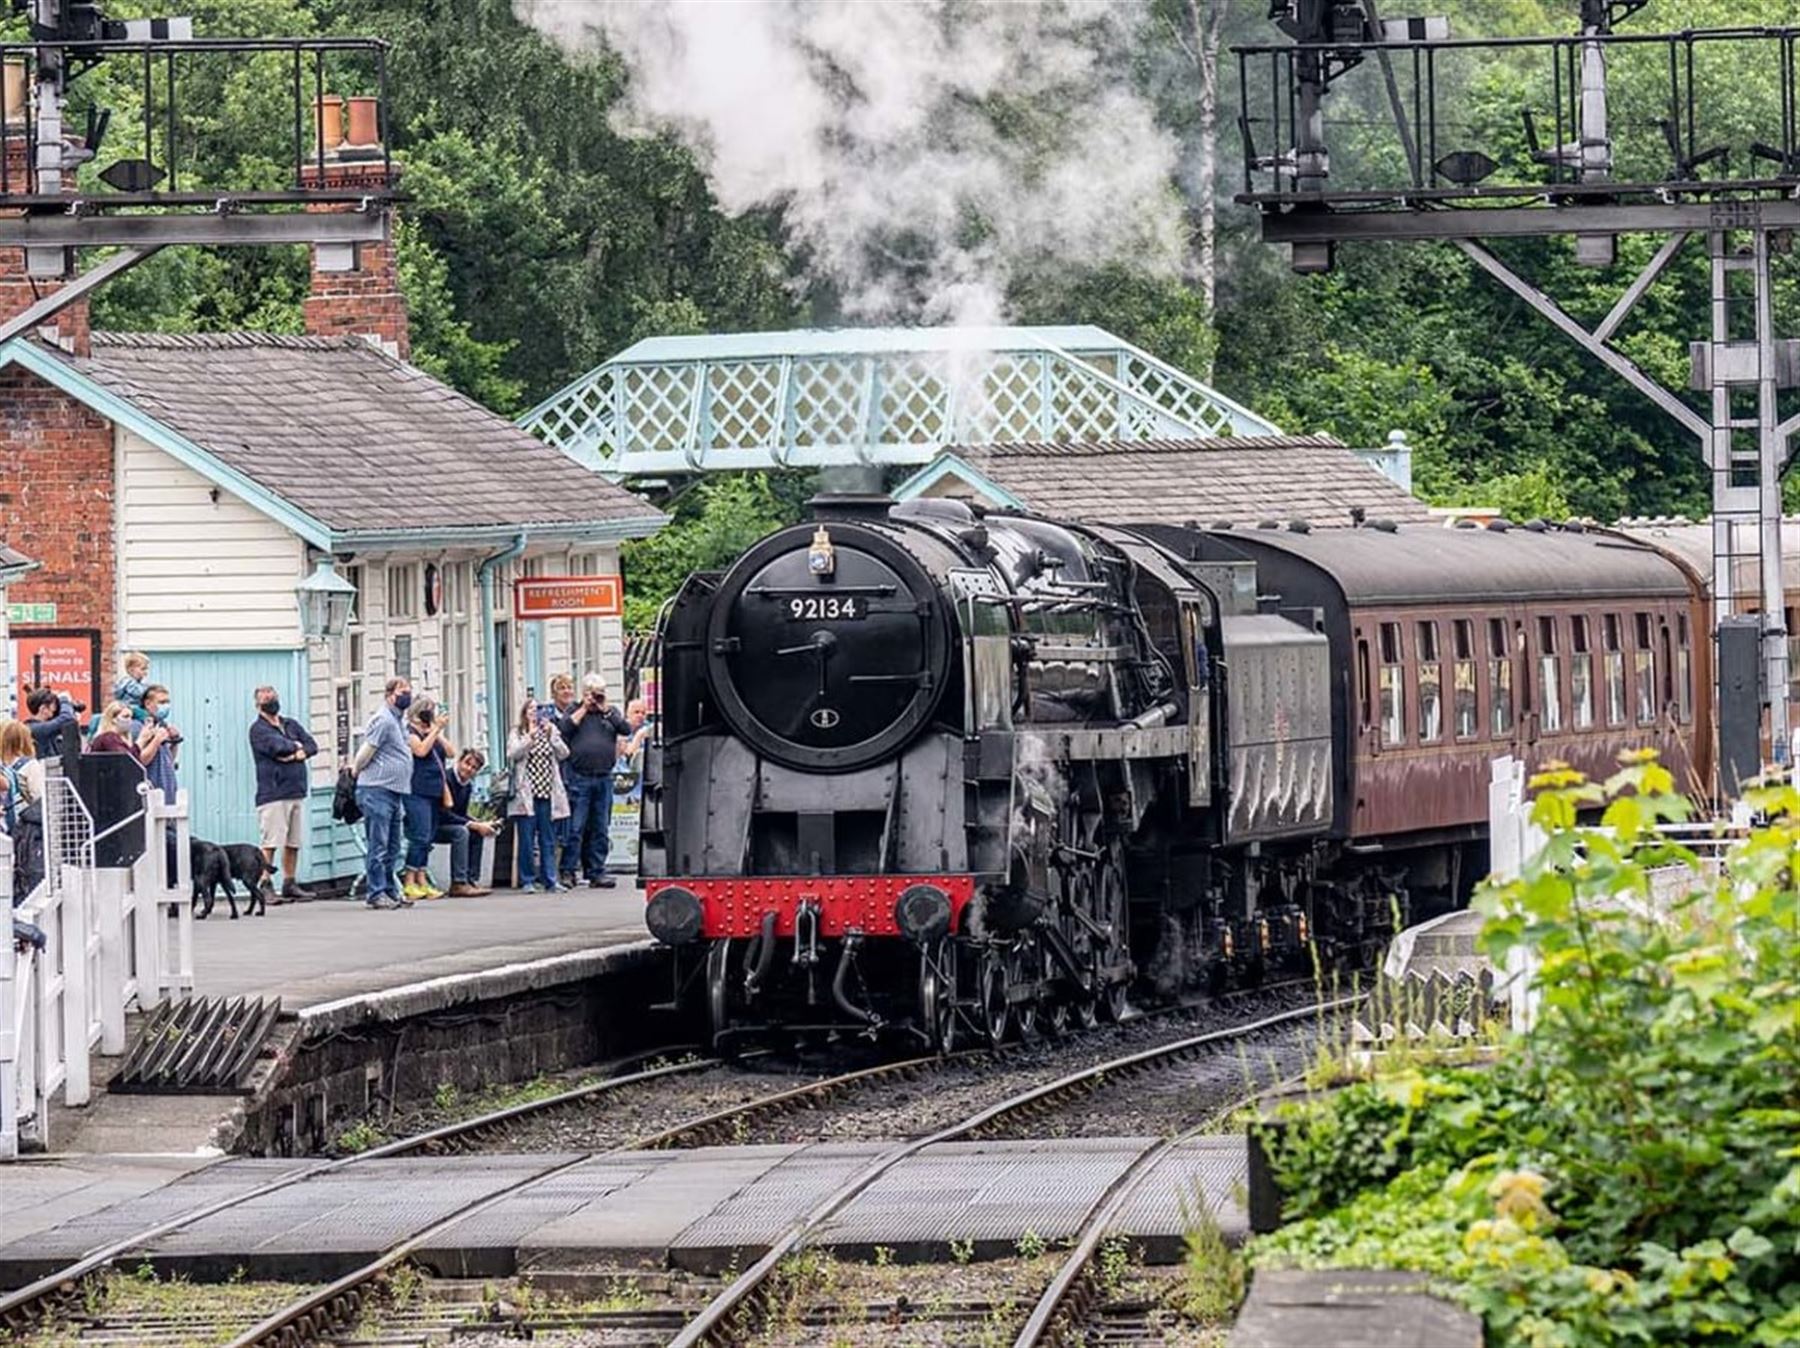 Family Travel Voucher with North Yorkshire Moors Railway. Enjoy a Pickering to Whitby return jou - Image 2 of 2